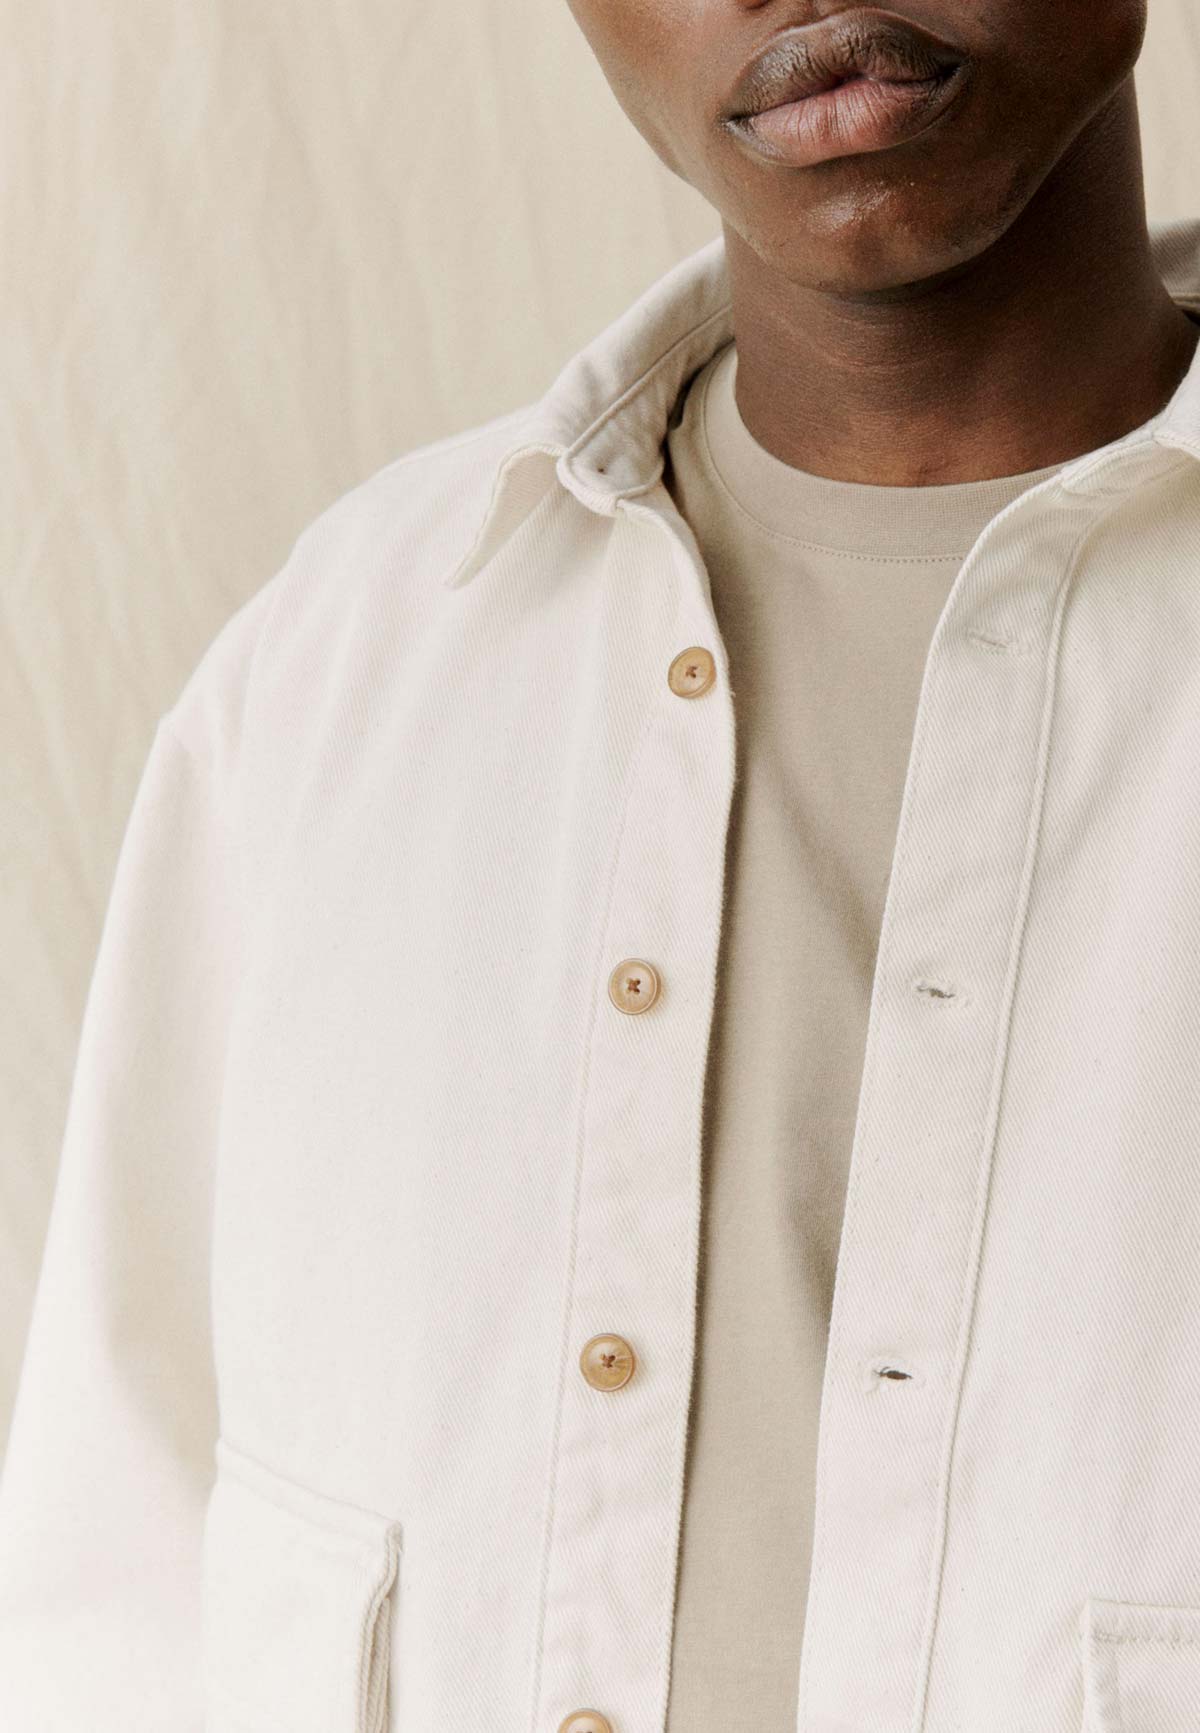 OBSTACLE OFF WHITE SHIRT - Moeon